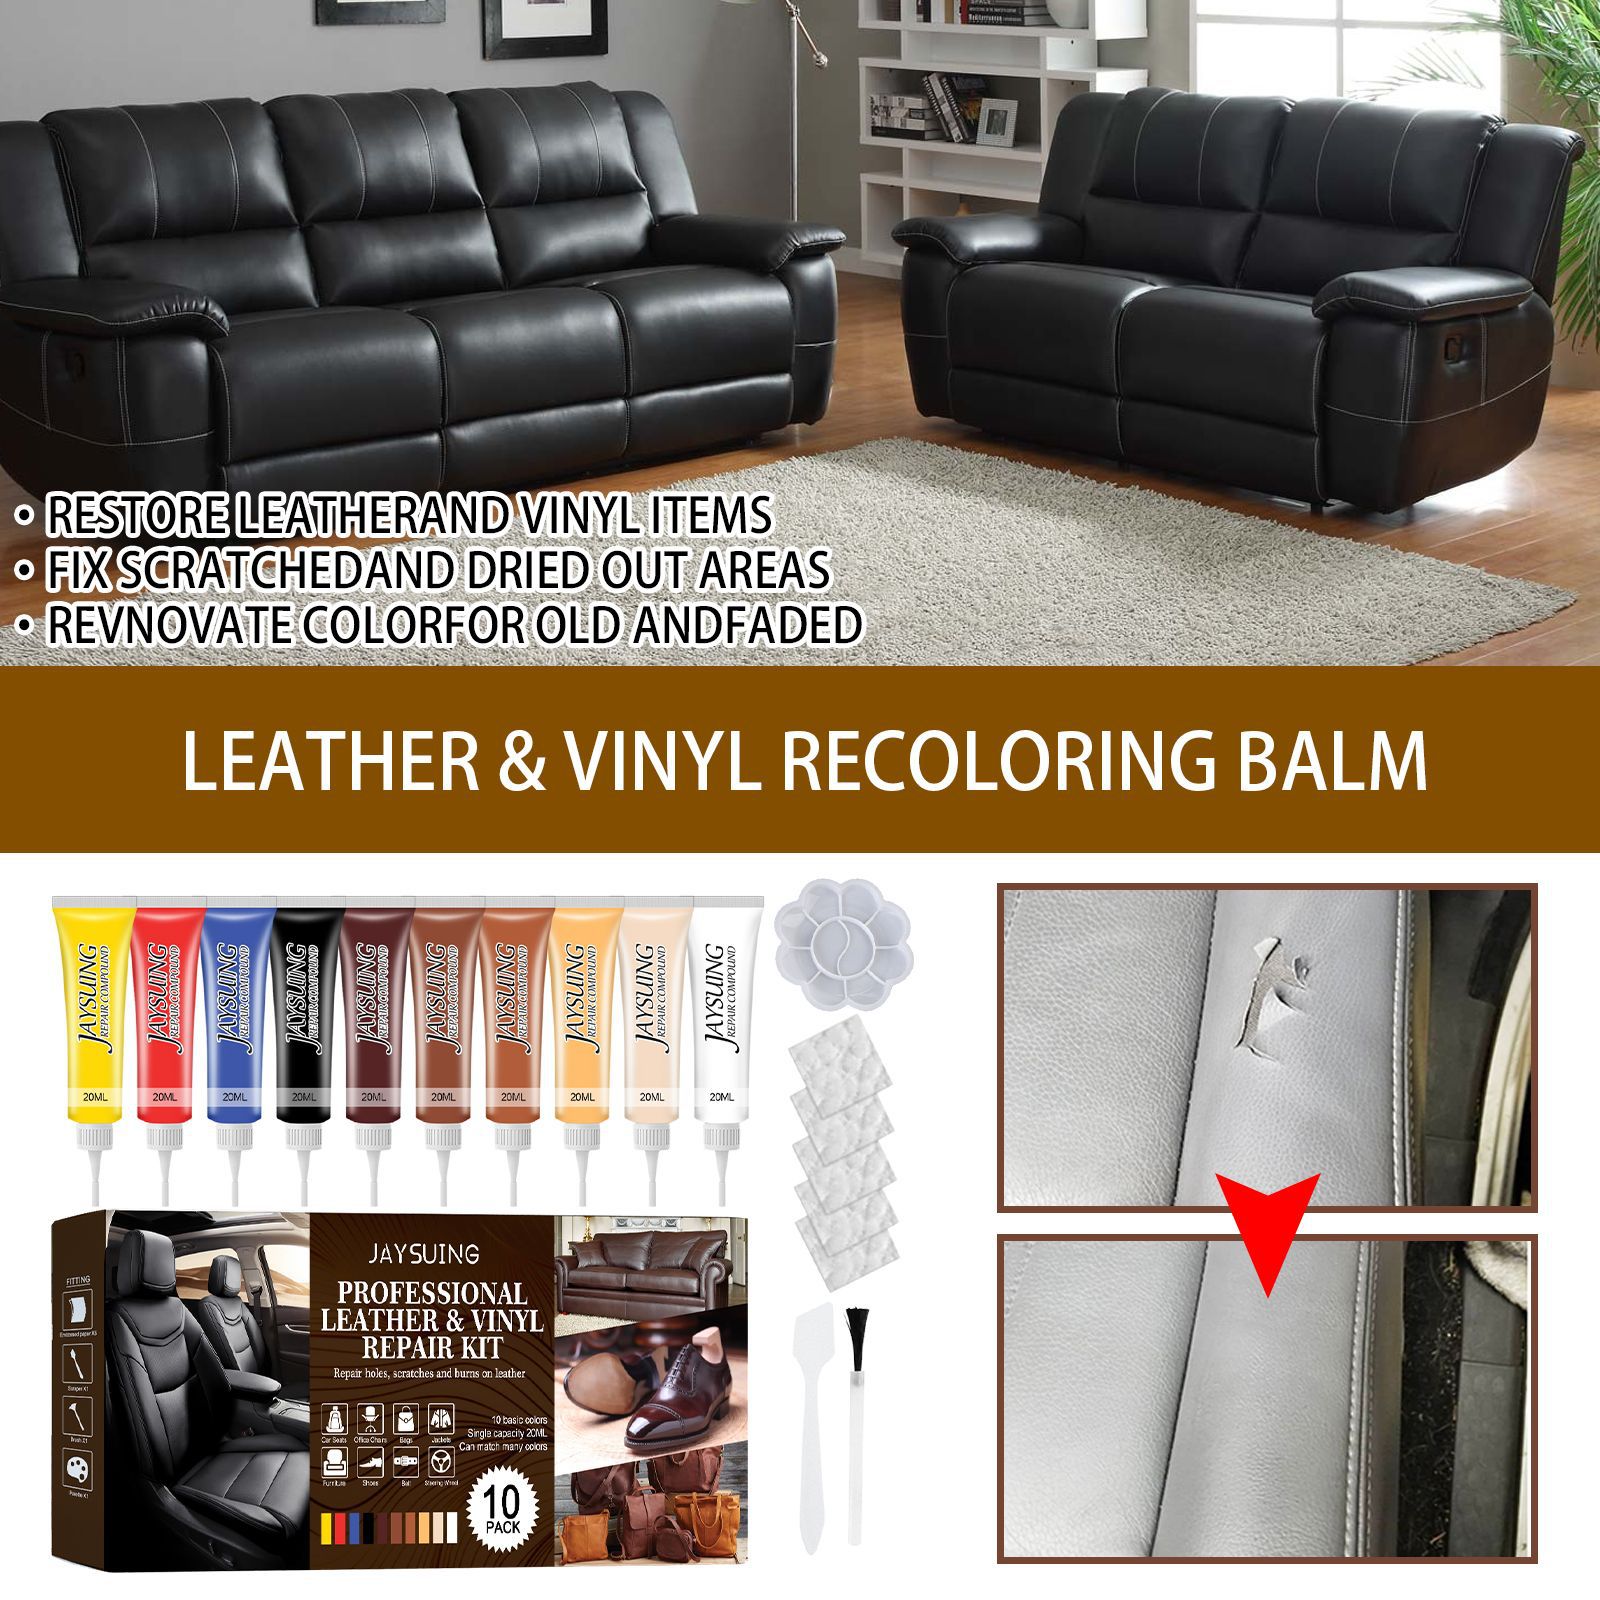  Black Leather Repair Kit For Furniture, Leather Dye For Car  Seat, Sofa, Boot Care, Shoes, Leather Filler, Leather Scratch Repair Kit